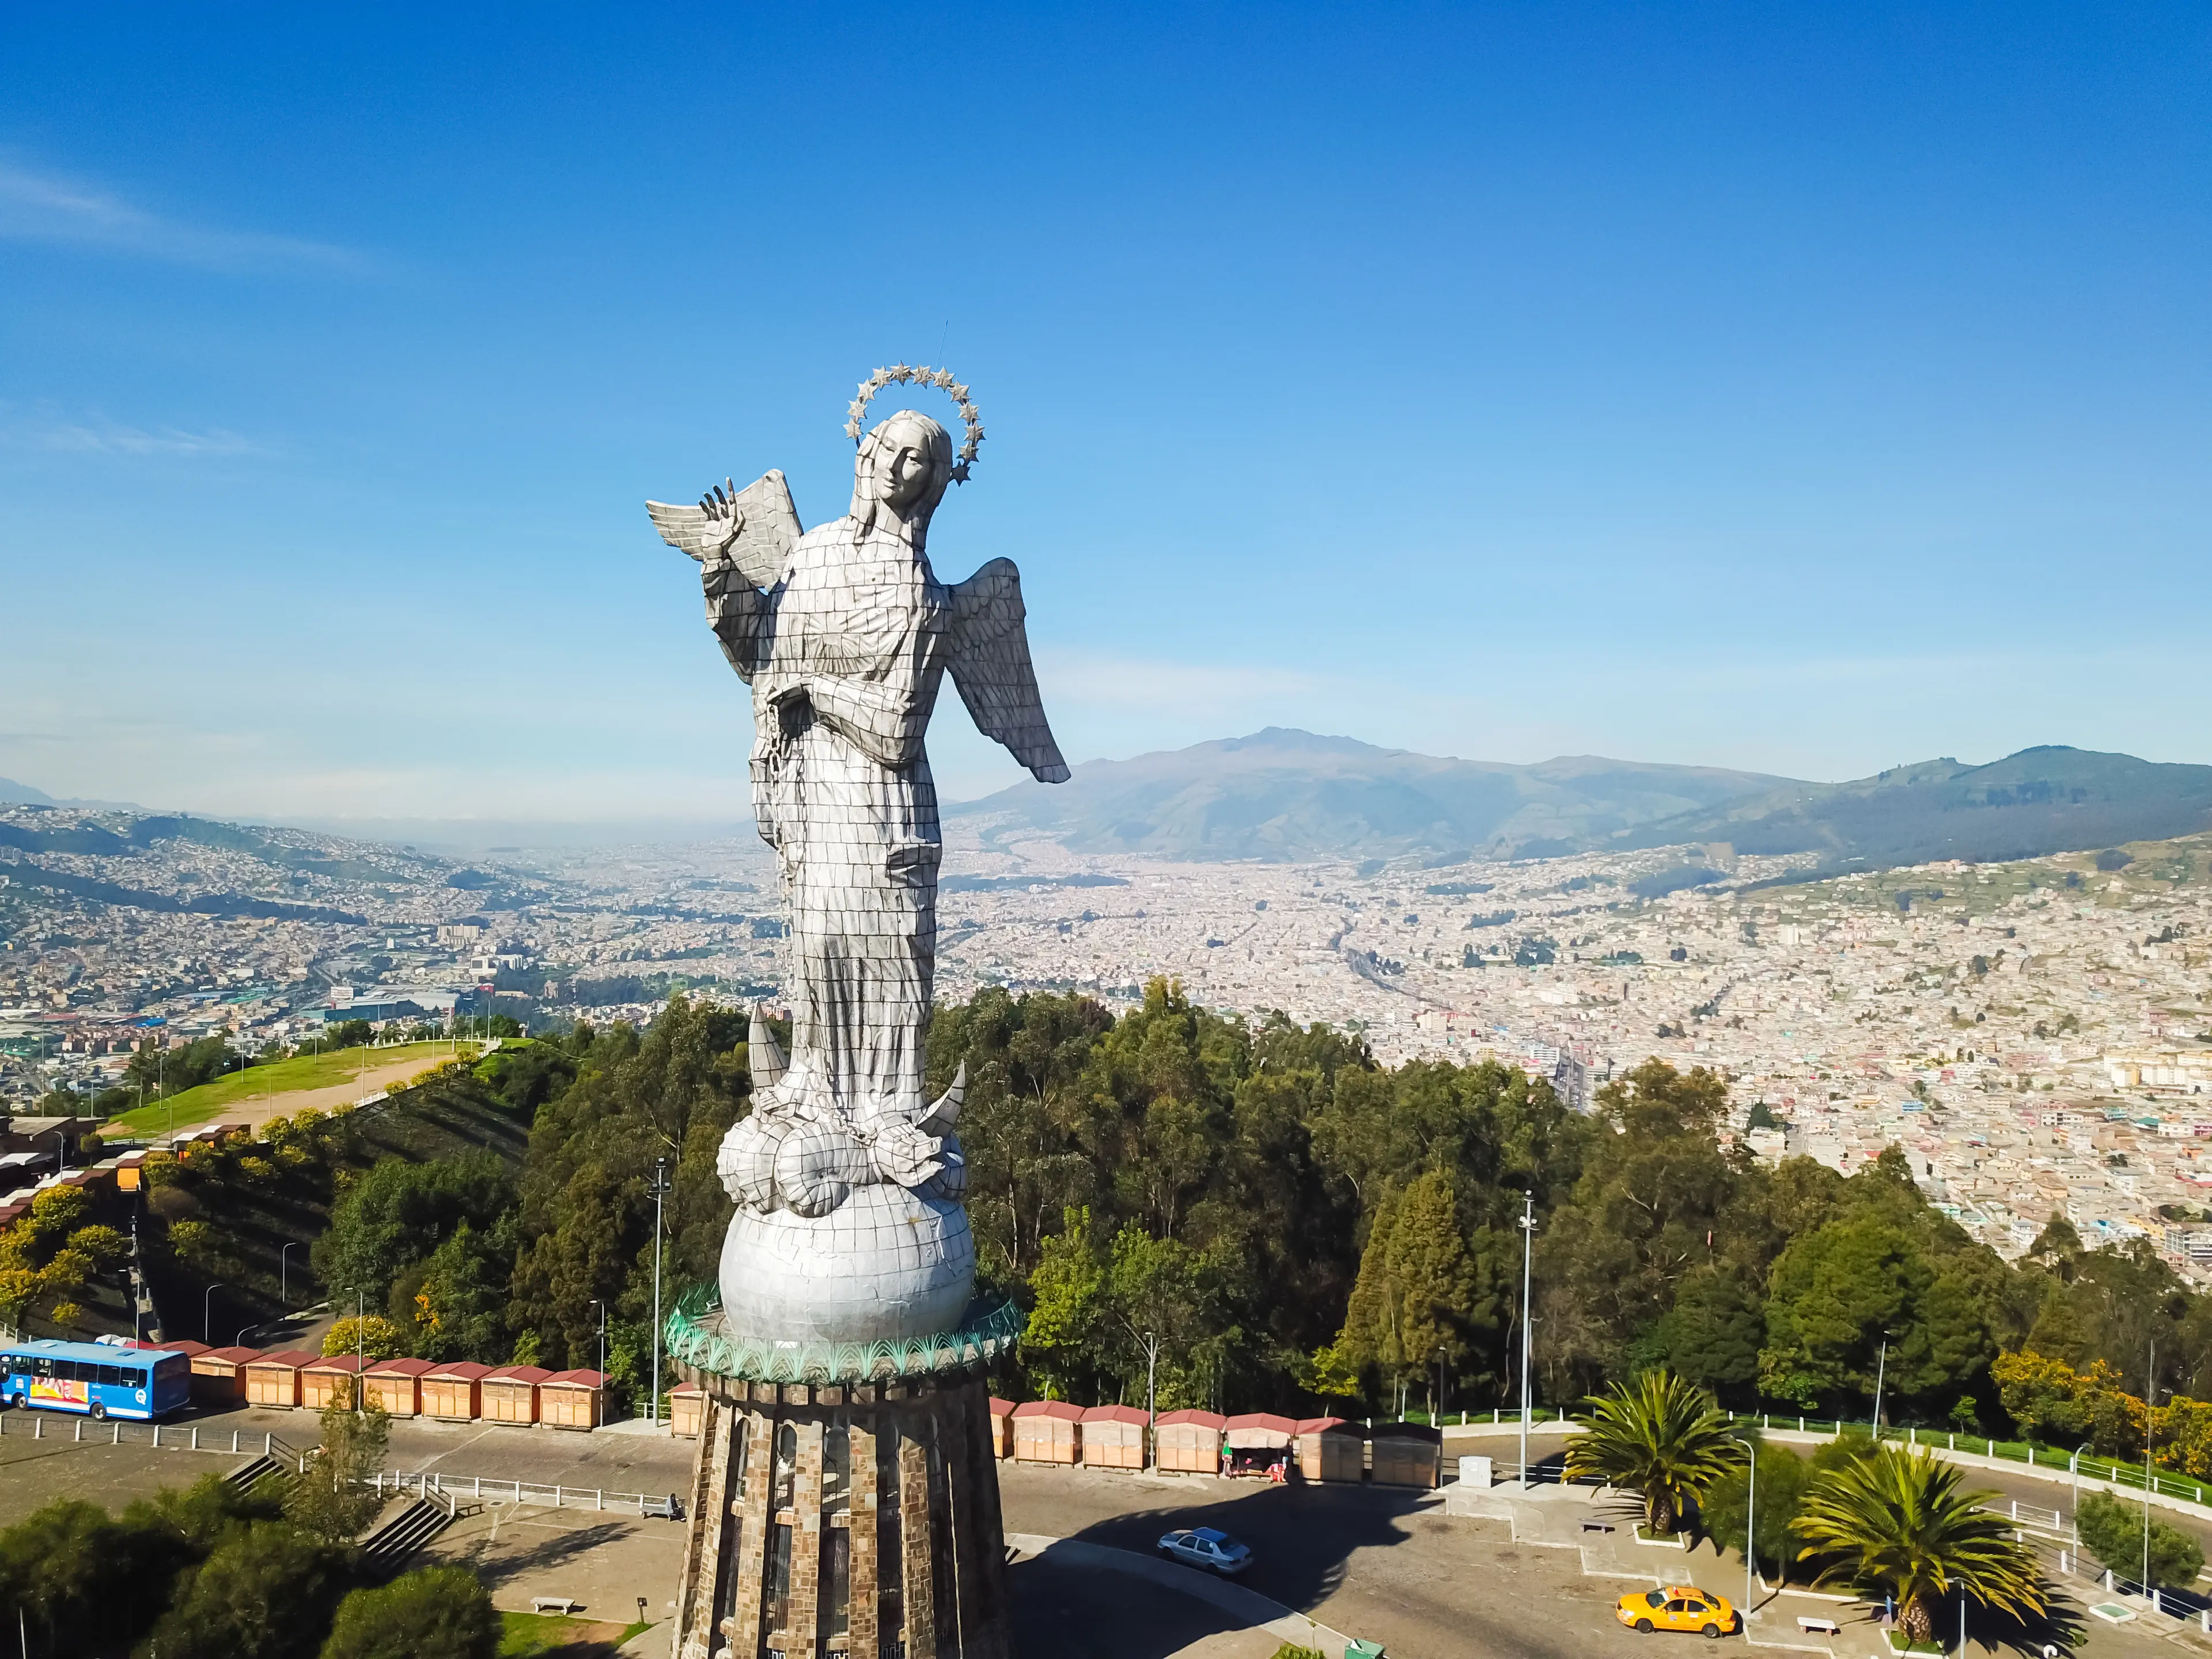 3-Day Adventure & Sightseeing Expedition in Undiscovered Quito, Ecuador